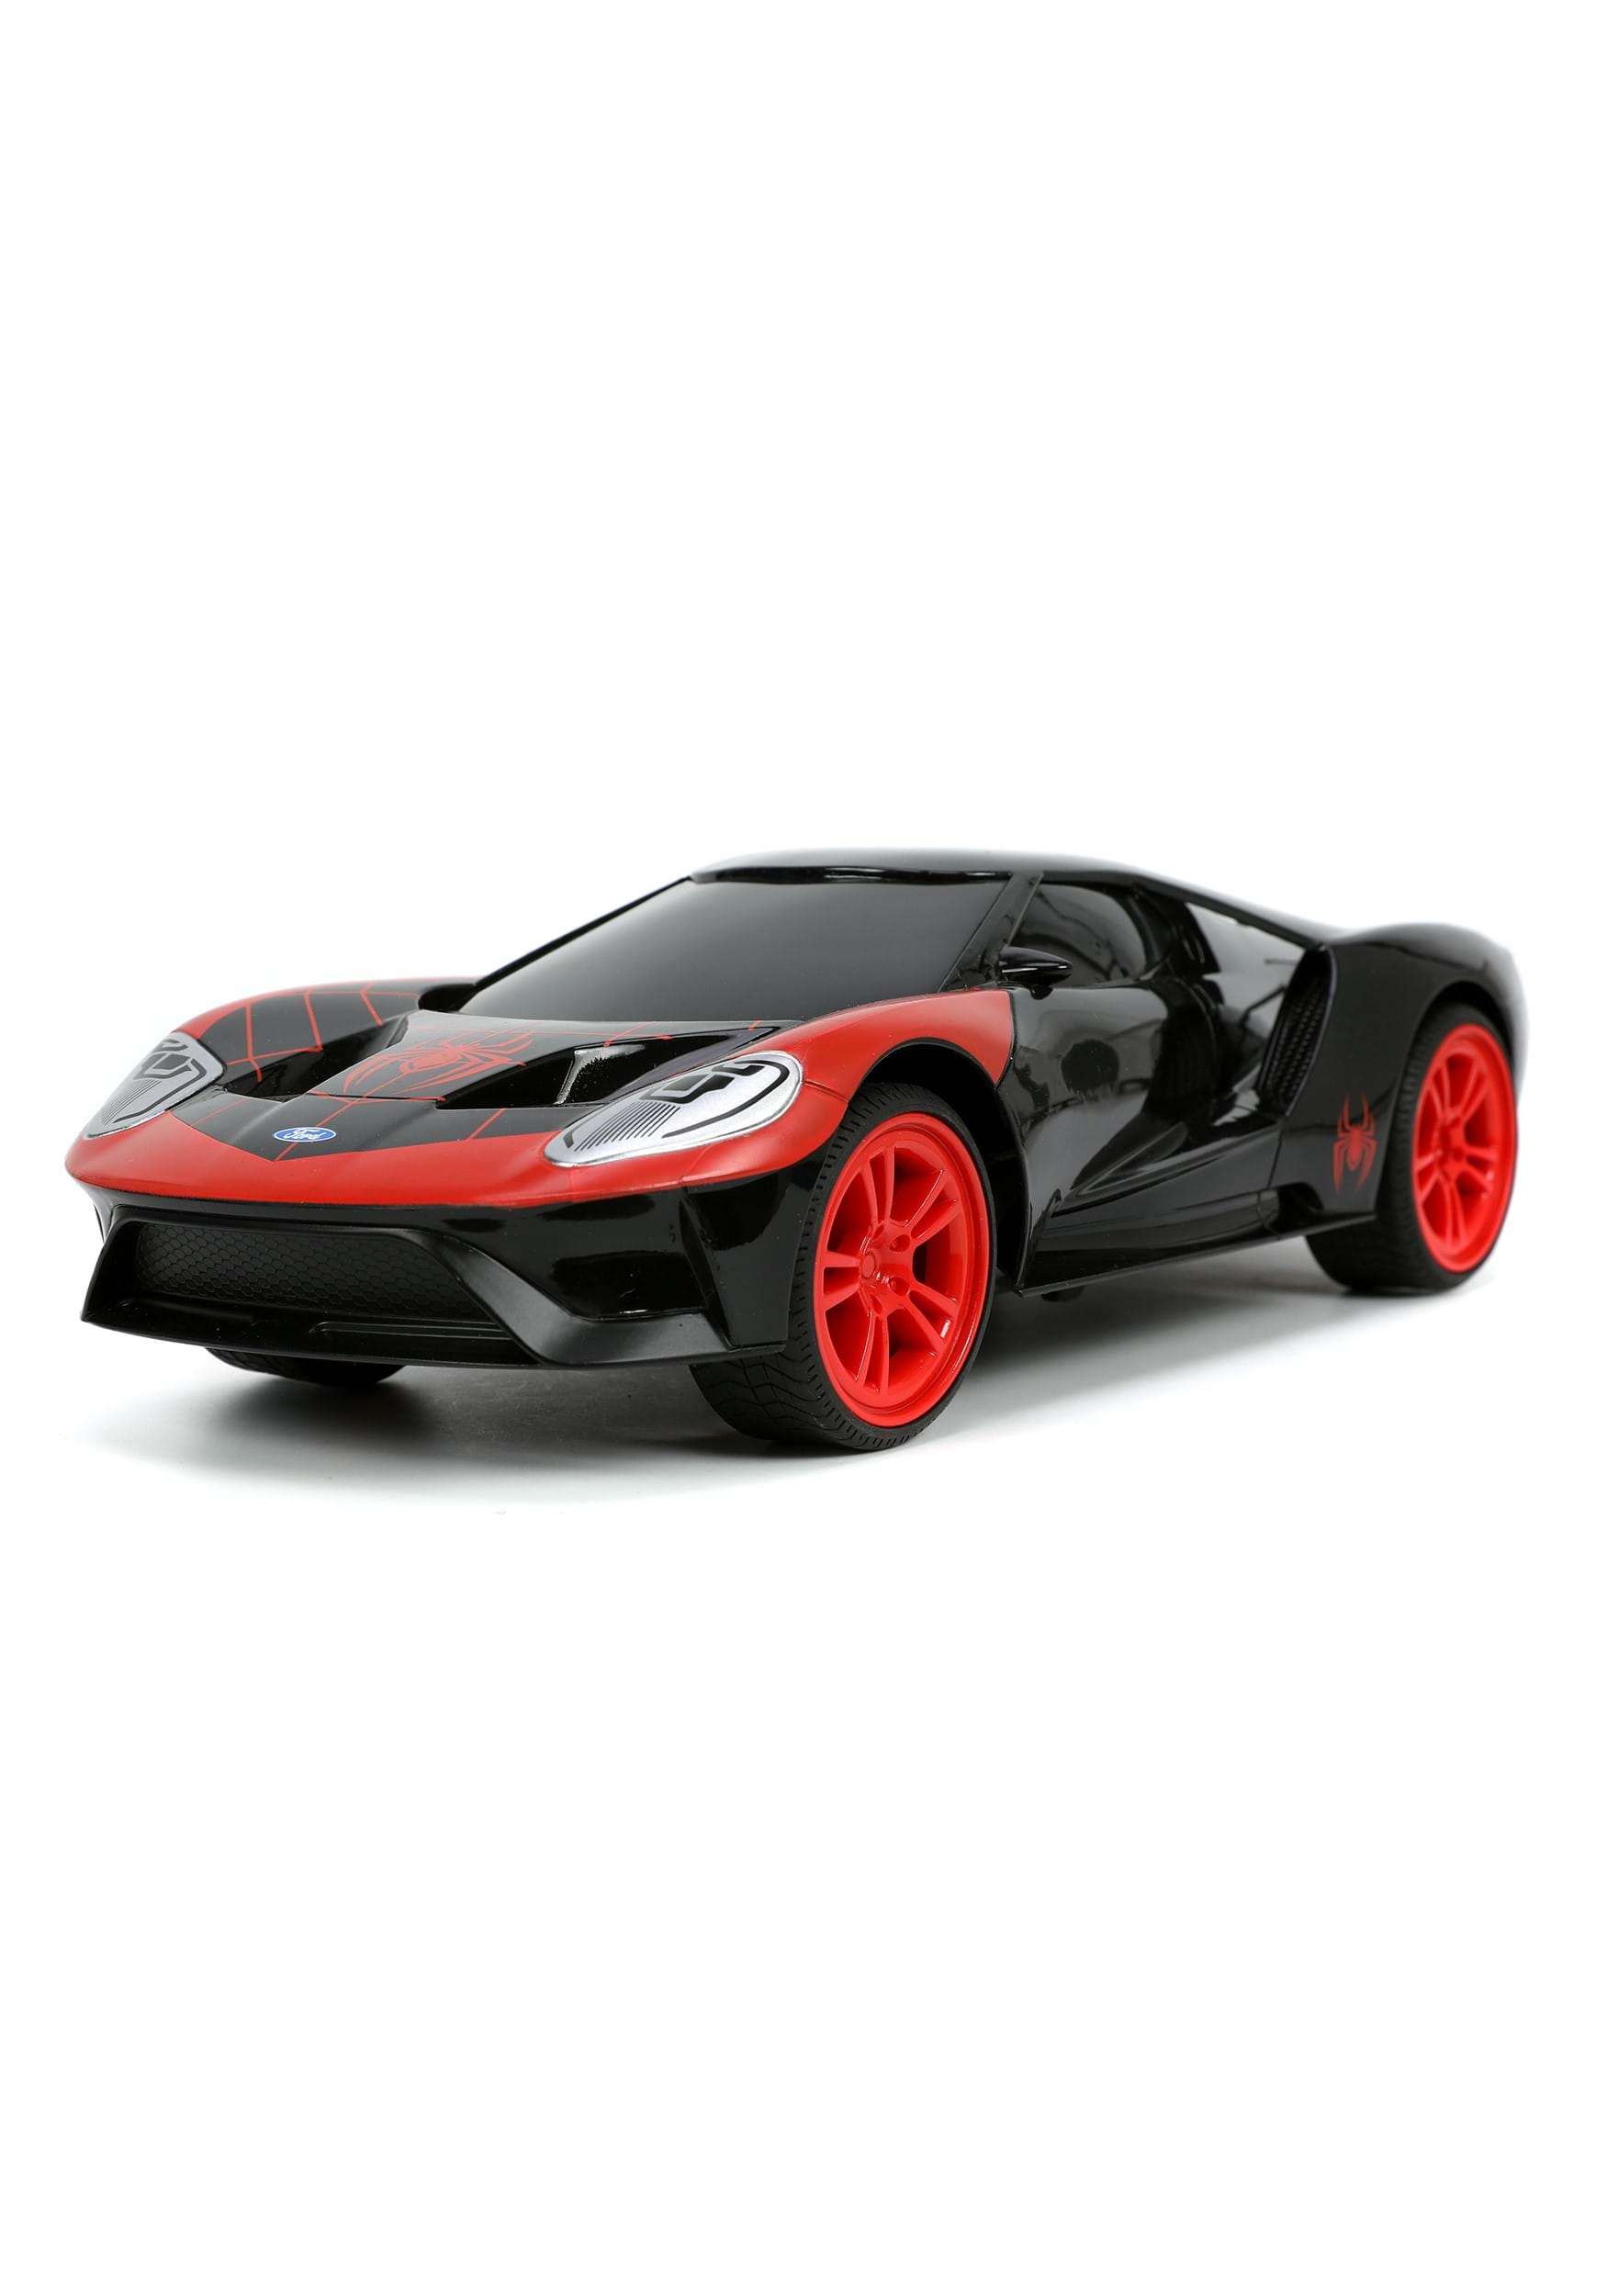 Miles Morales '17 Ford GT 1:16 RC Vehicle